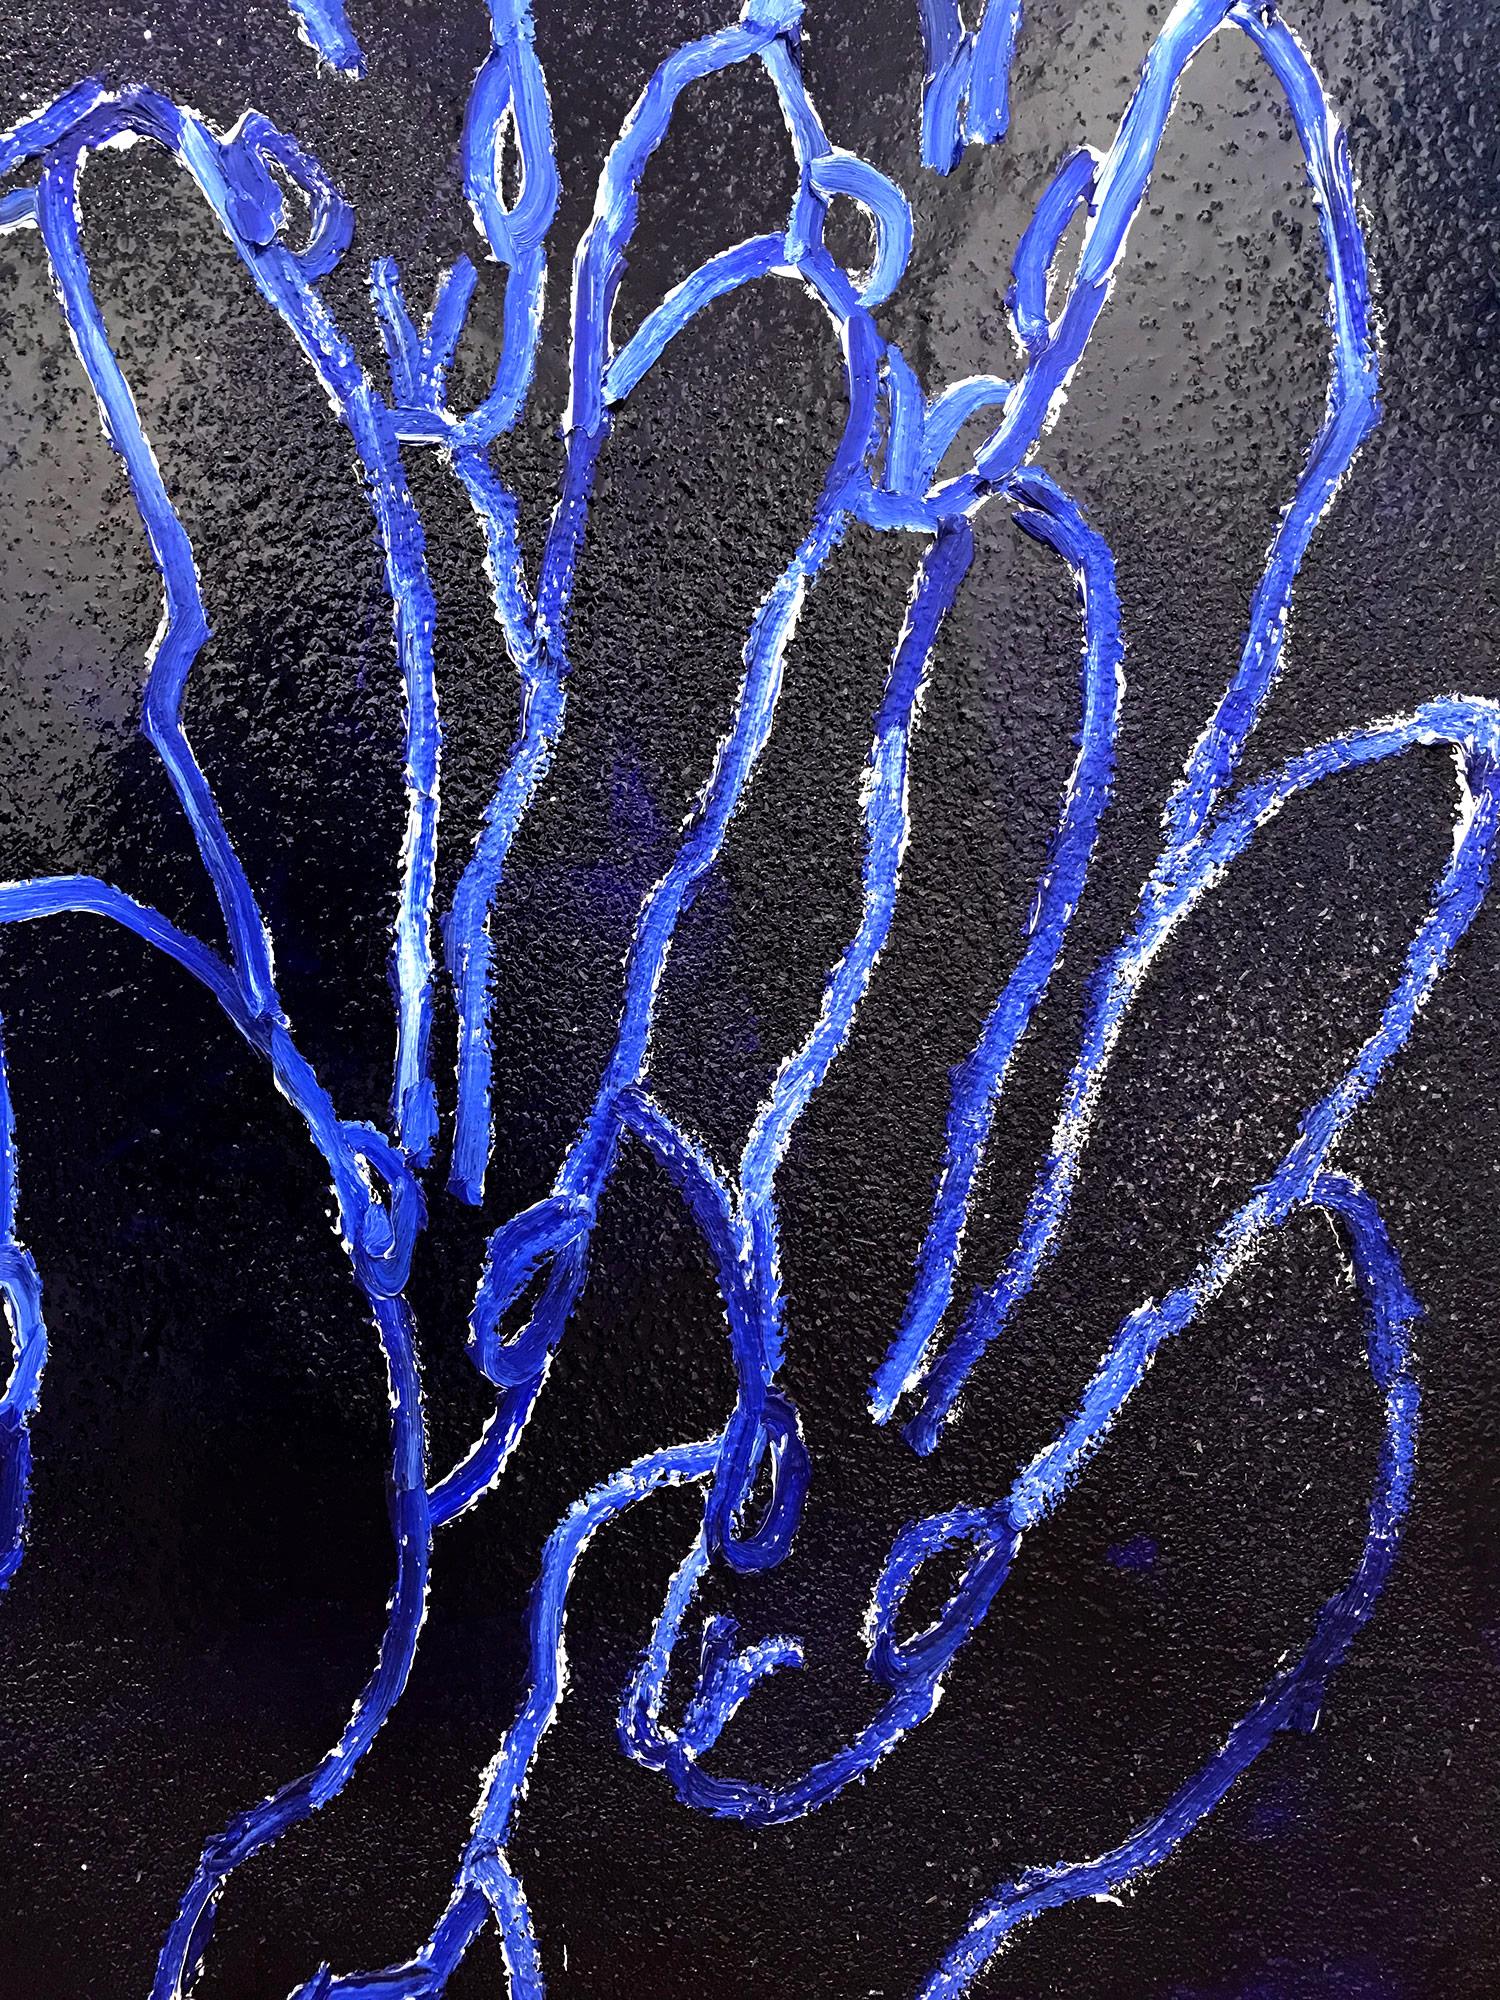 A stunning composition of one of Slonem's most iconic subjects, Bunnies. This piece depicts gestural figures of Bunnies against ultramarine blue diamond dust. Slonem traces these 23 bunnies with thick white paint and then encases the piece in